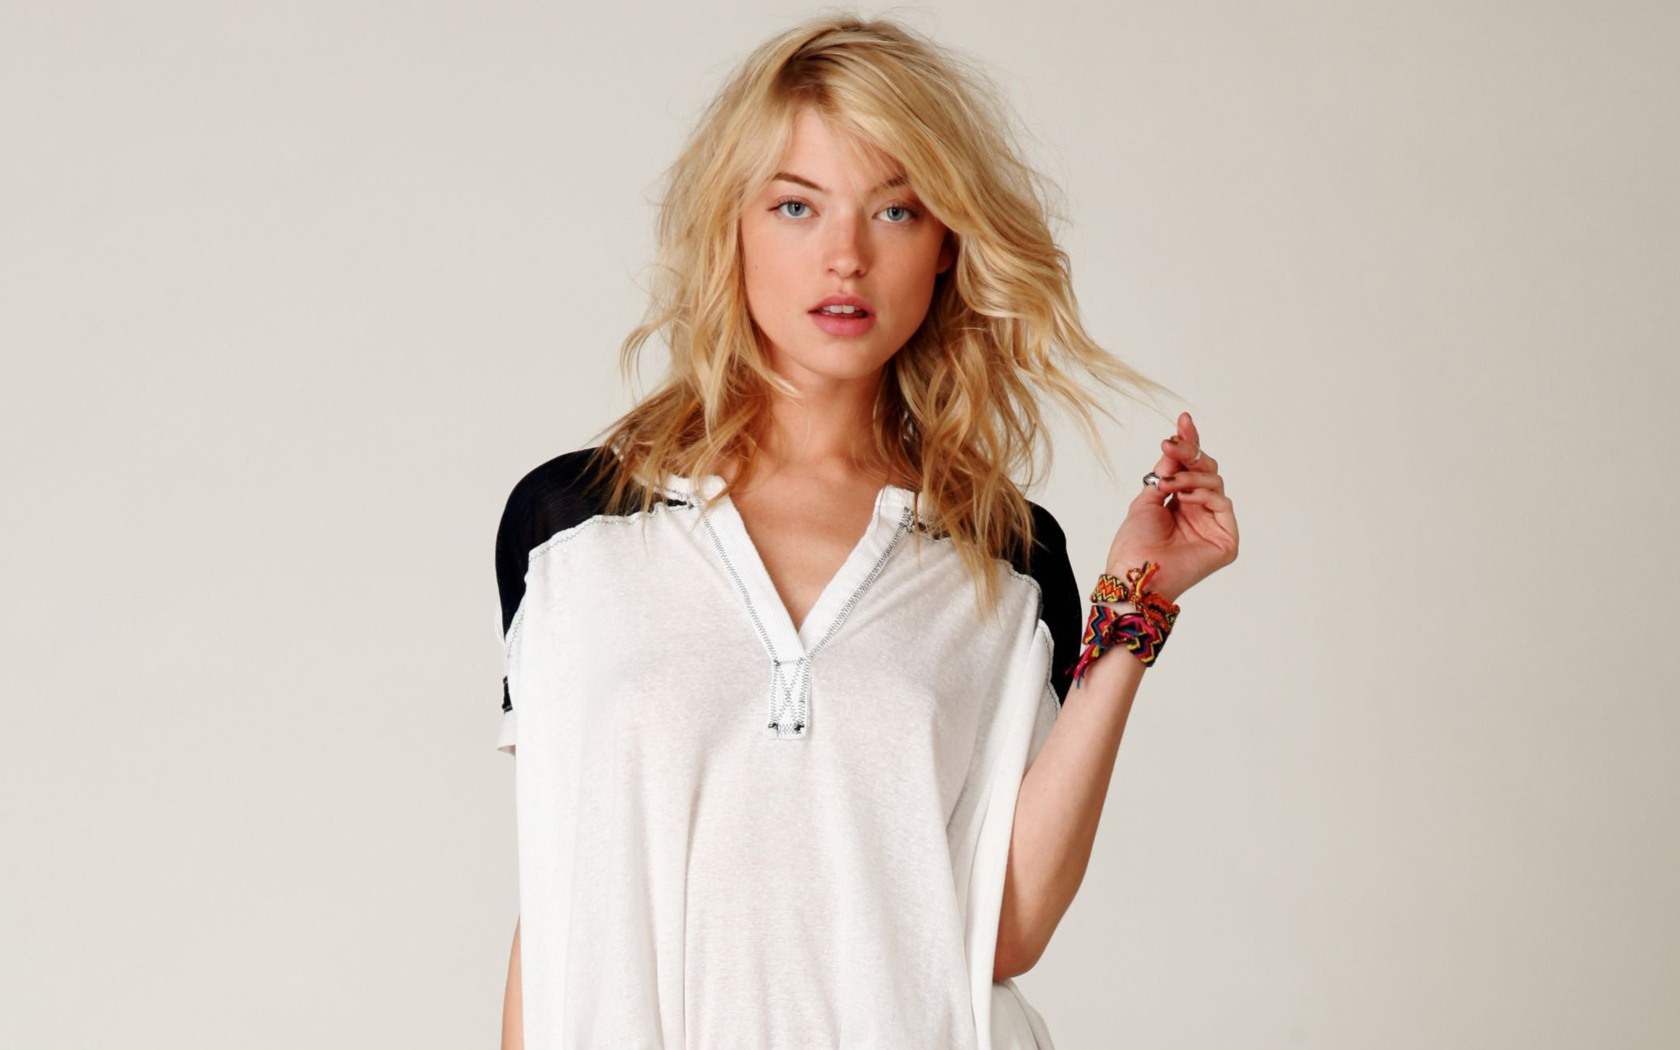 Model Martha Hunt in a t-shirt on a gray background